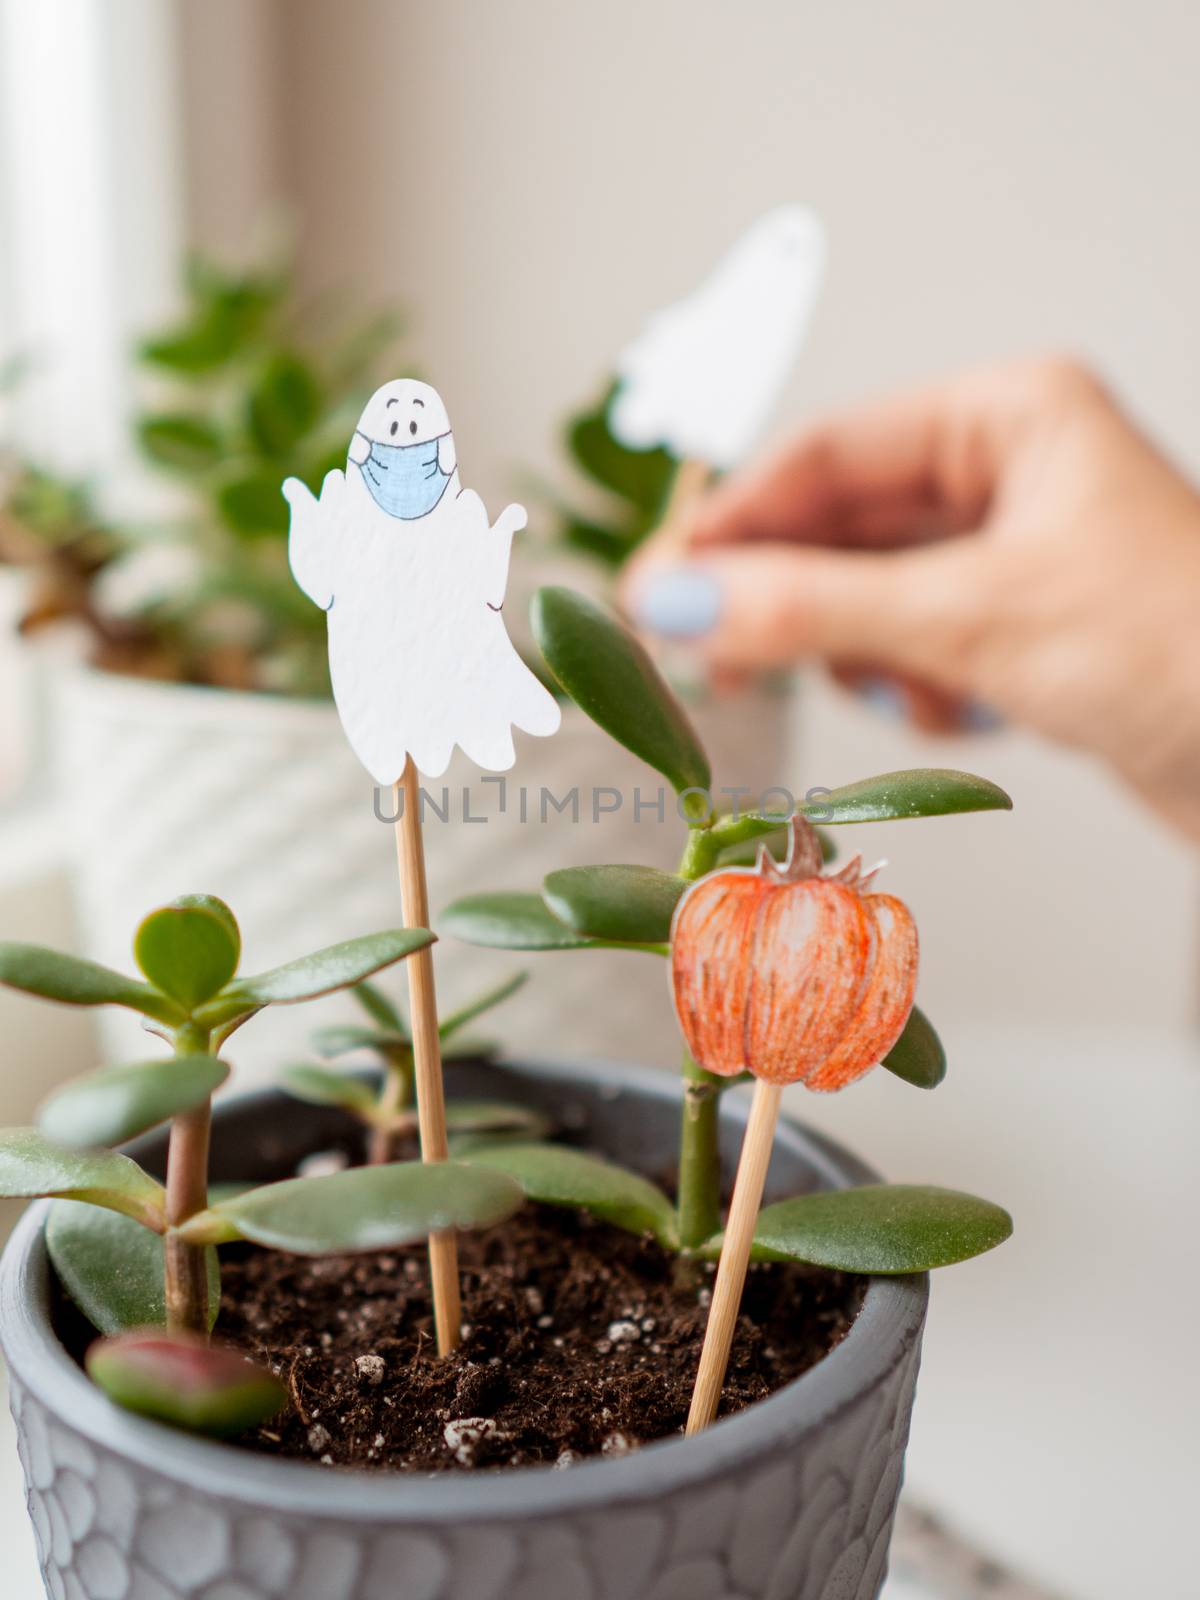 Woman decorates flower pots with handmade decorations for Halloween. Painted ghost in medical protective mask and pumpkin in flower pot with succulent plant.